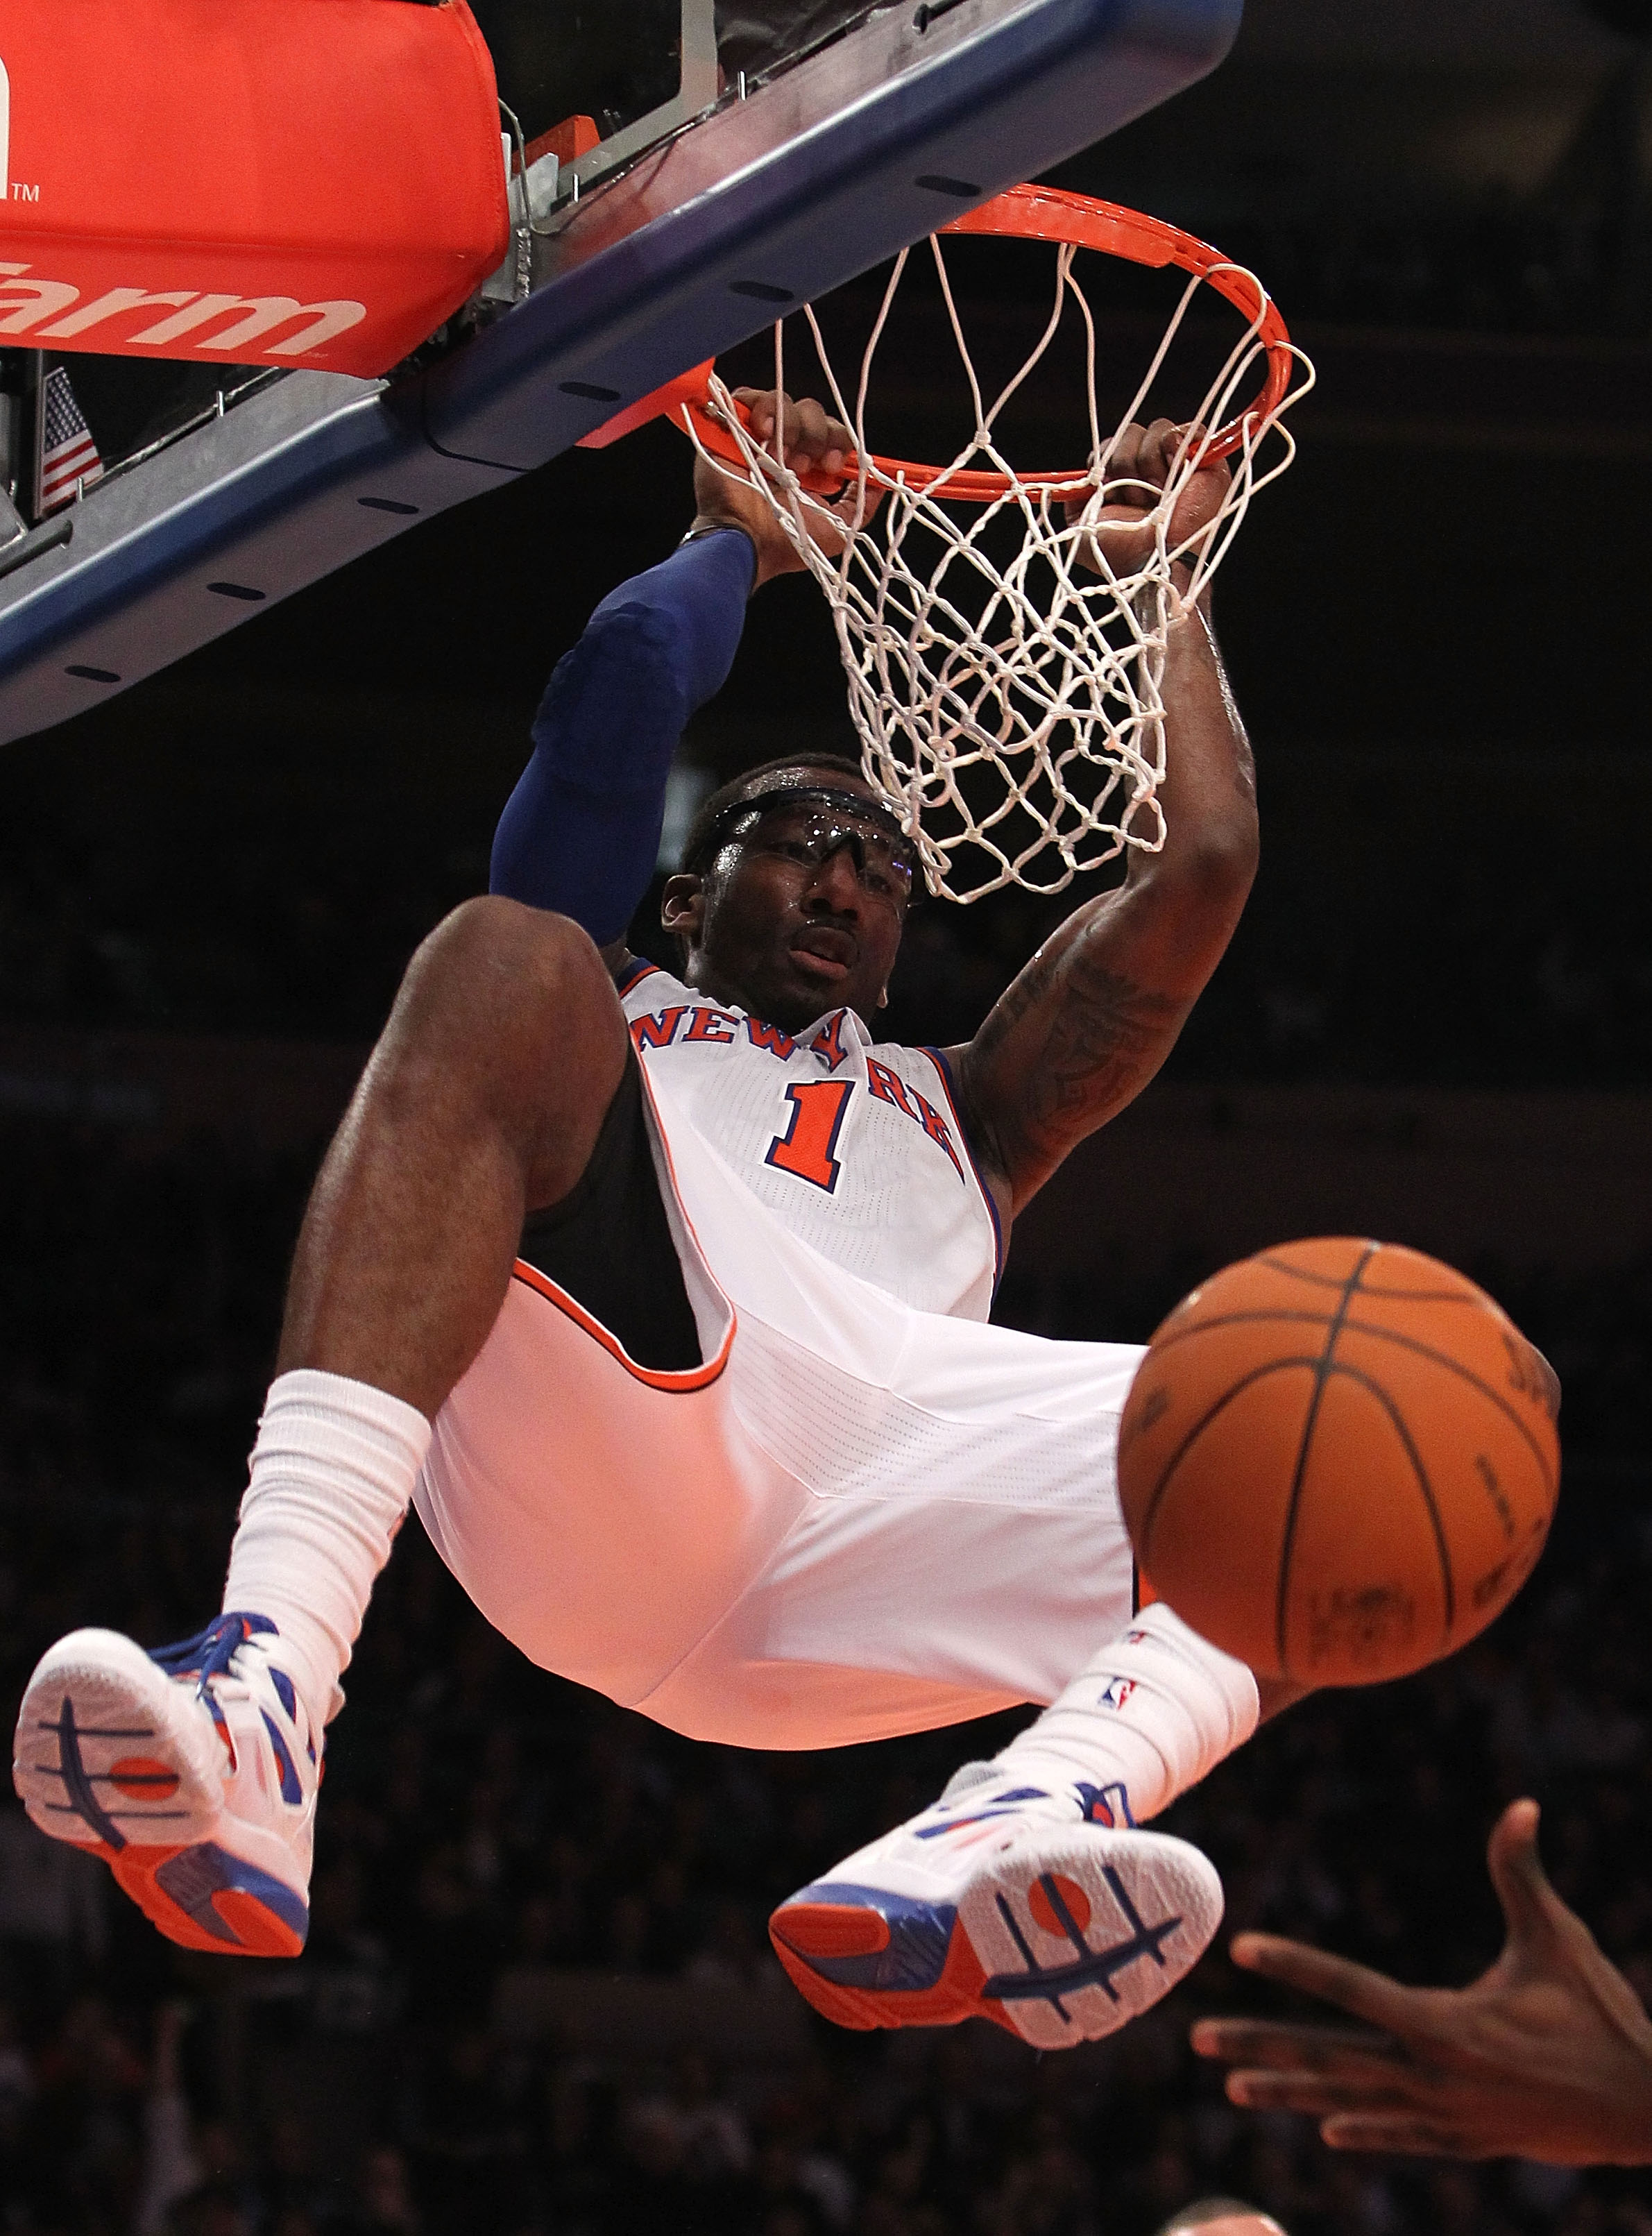 NEW YORK, NY - NOVEMBER 30: Amar'e Stoudemire #1 of the New York Knicks dunks the ball against the New Jersey Nets on November 30, 2010 at Madison Square Garden in New York City. NOTE TO USER: User expressly acknowledges and agrees that, by downloading an